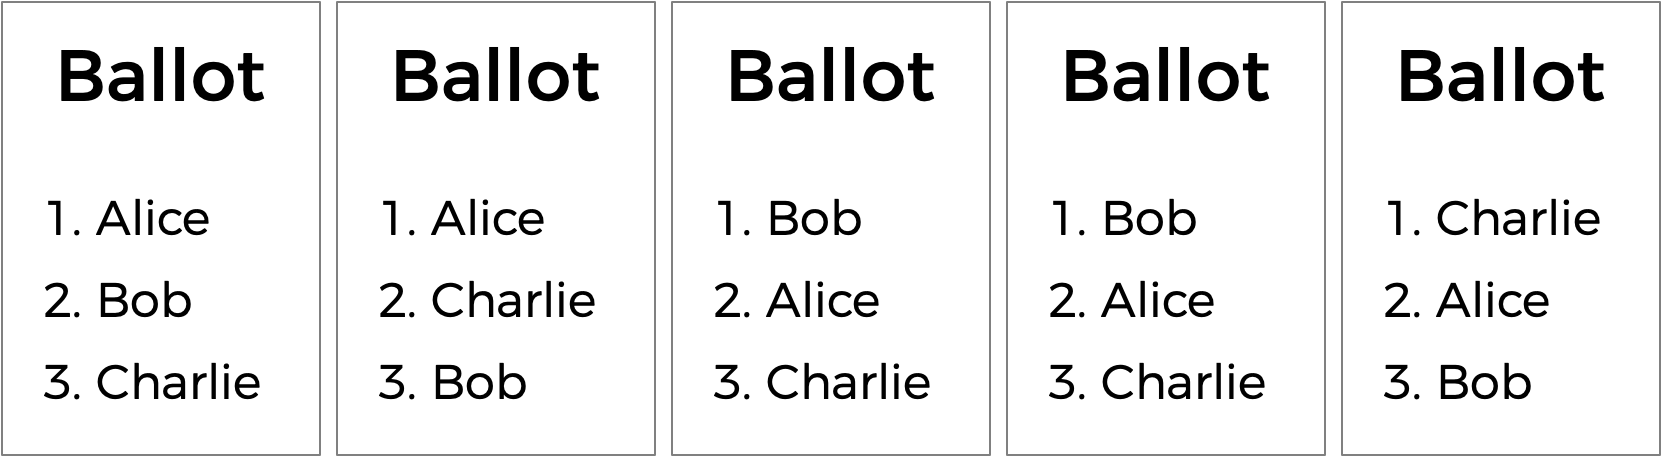 Five ballots, with ranked preferences